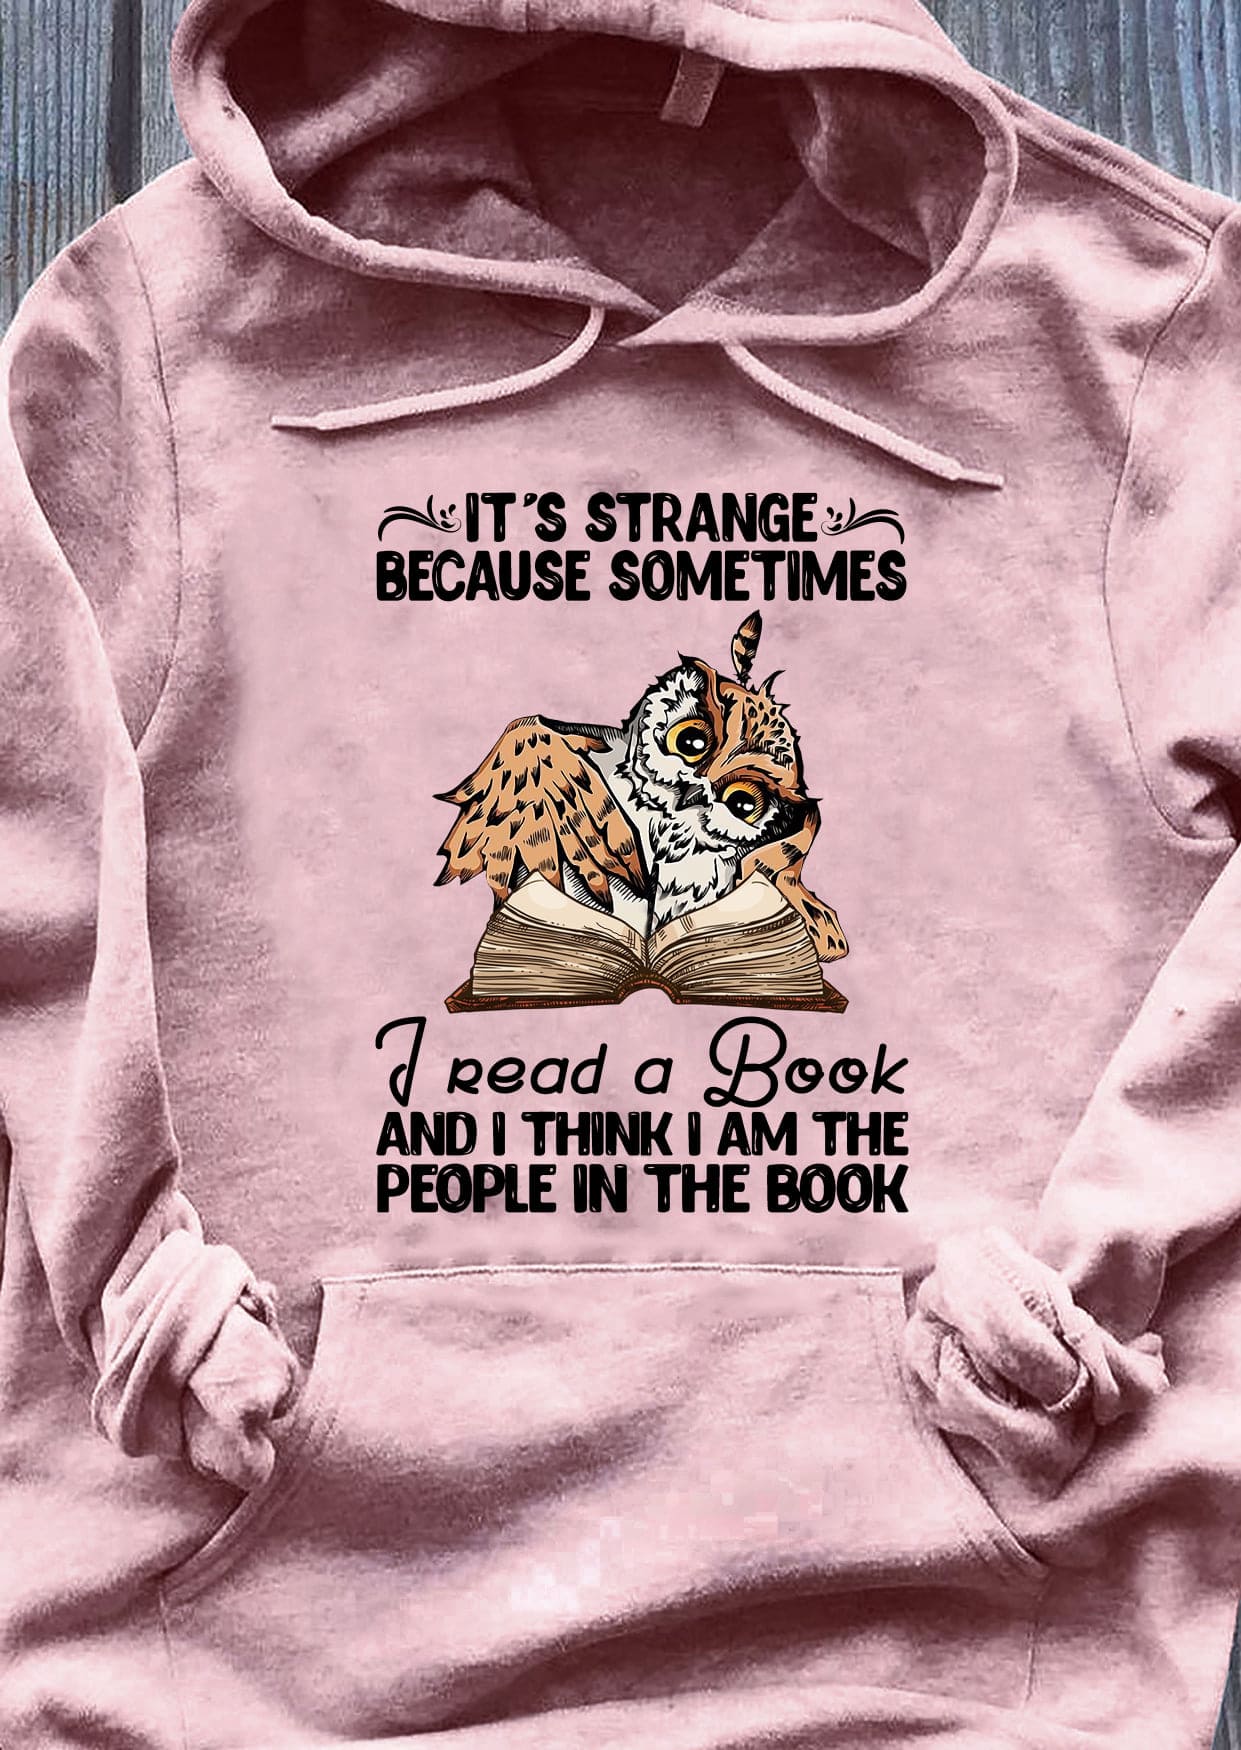 It's strange because sometimes I read a book and I think I am the people in the book - Owl reading books, gift for bookaholic